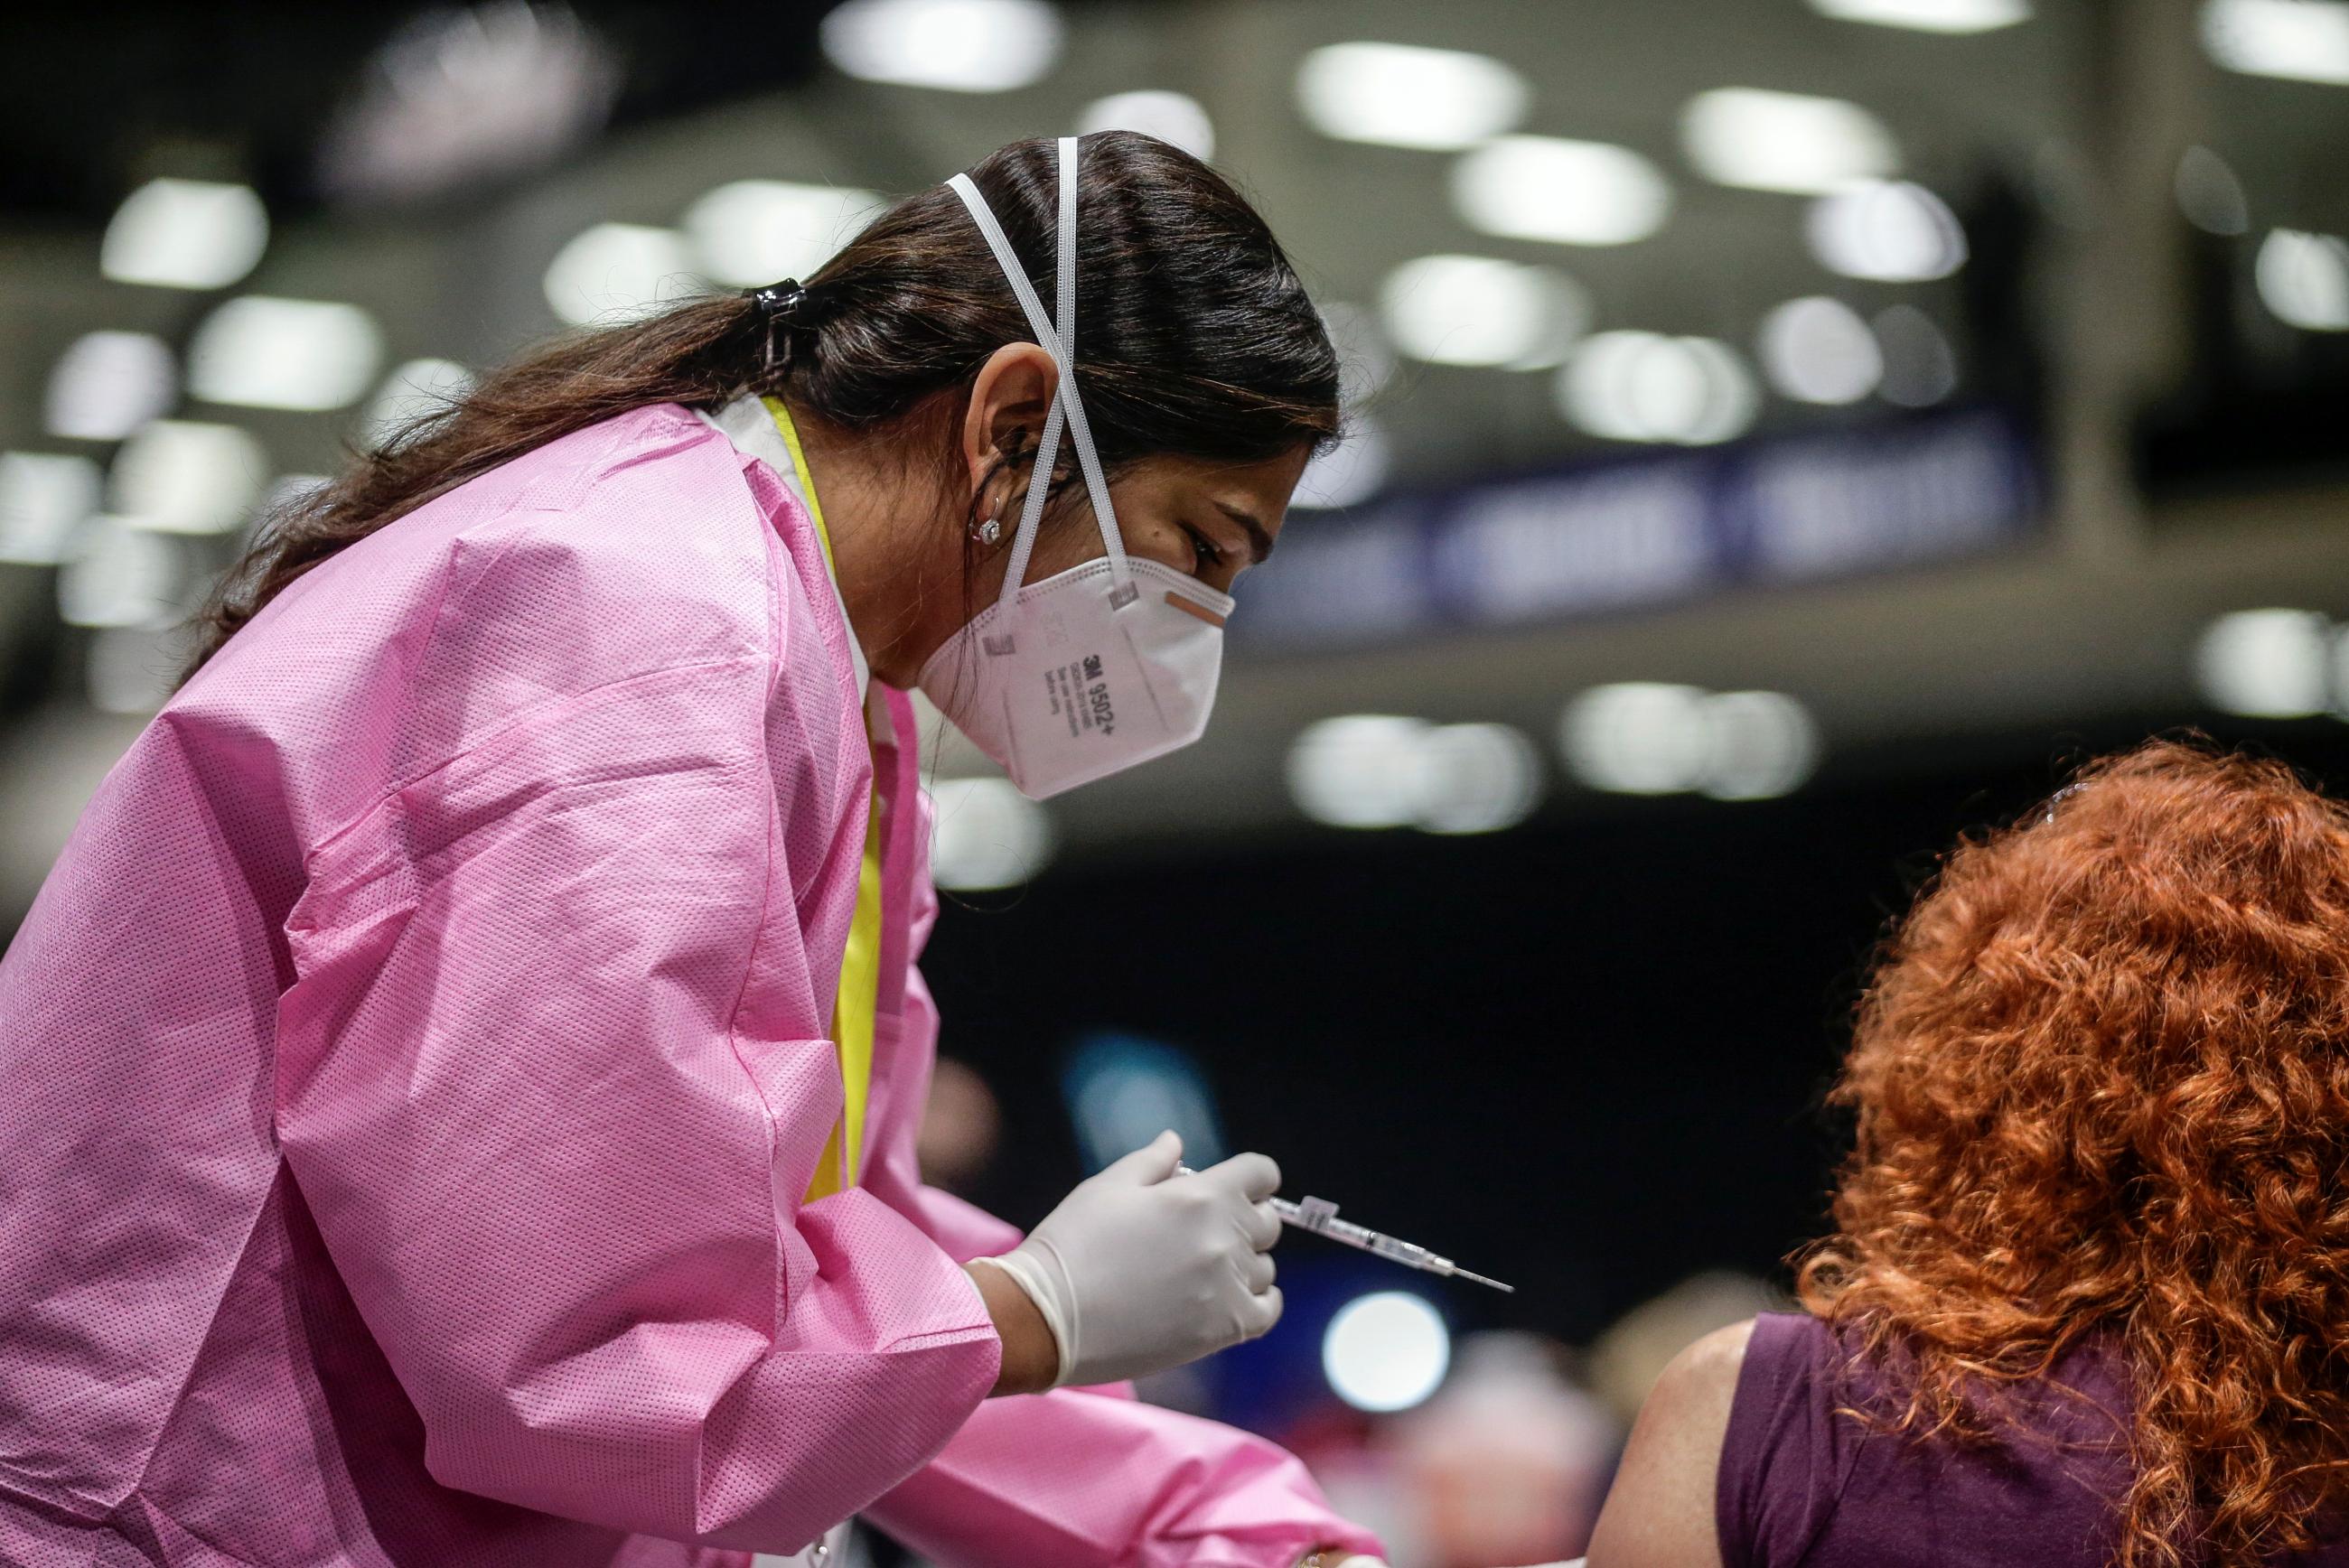 A health-care worker administers a coronavirus disease (COVID-19) vaccine at a mass vaccination site at Lumen Field Event Center in Seattle, Washington on March 13, 2021.